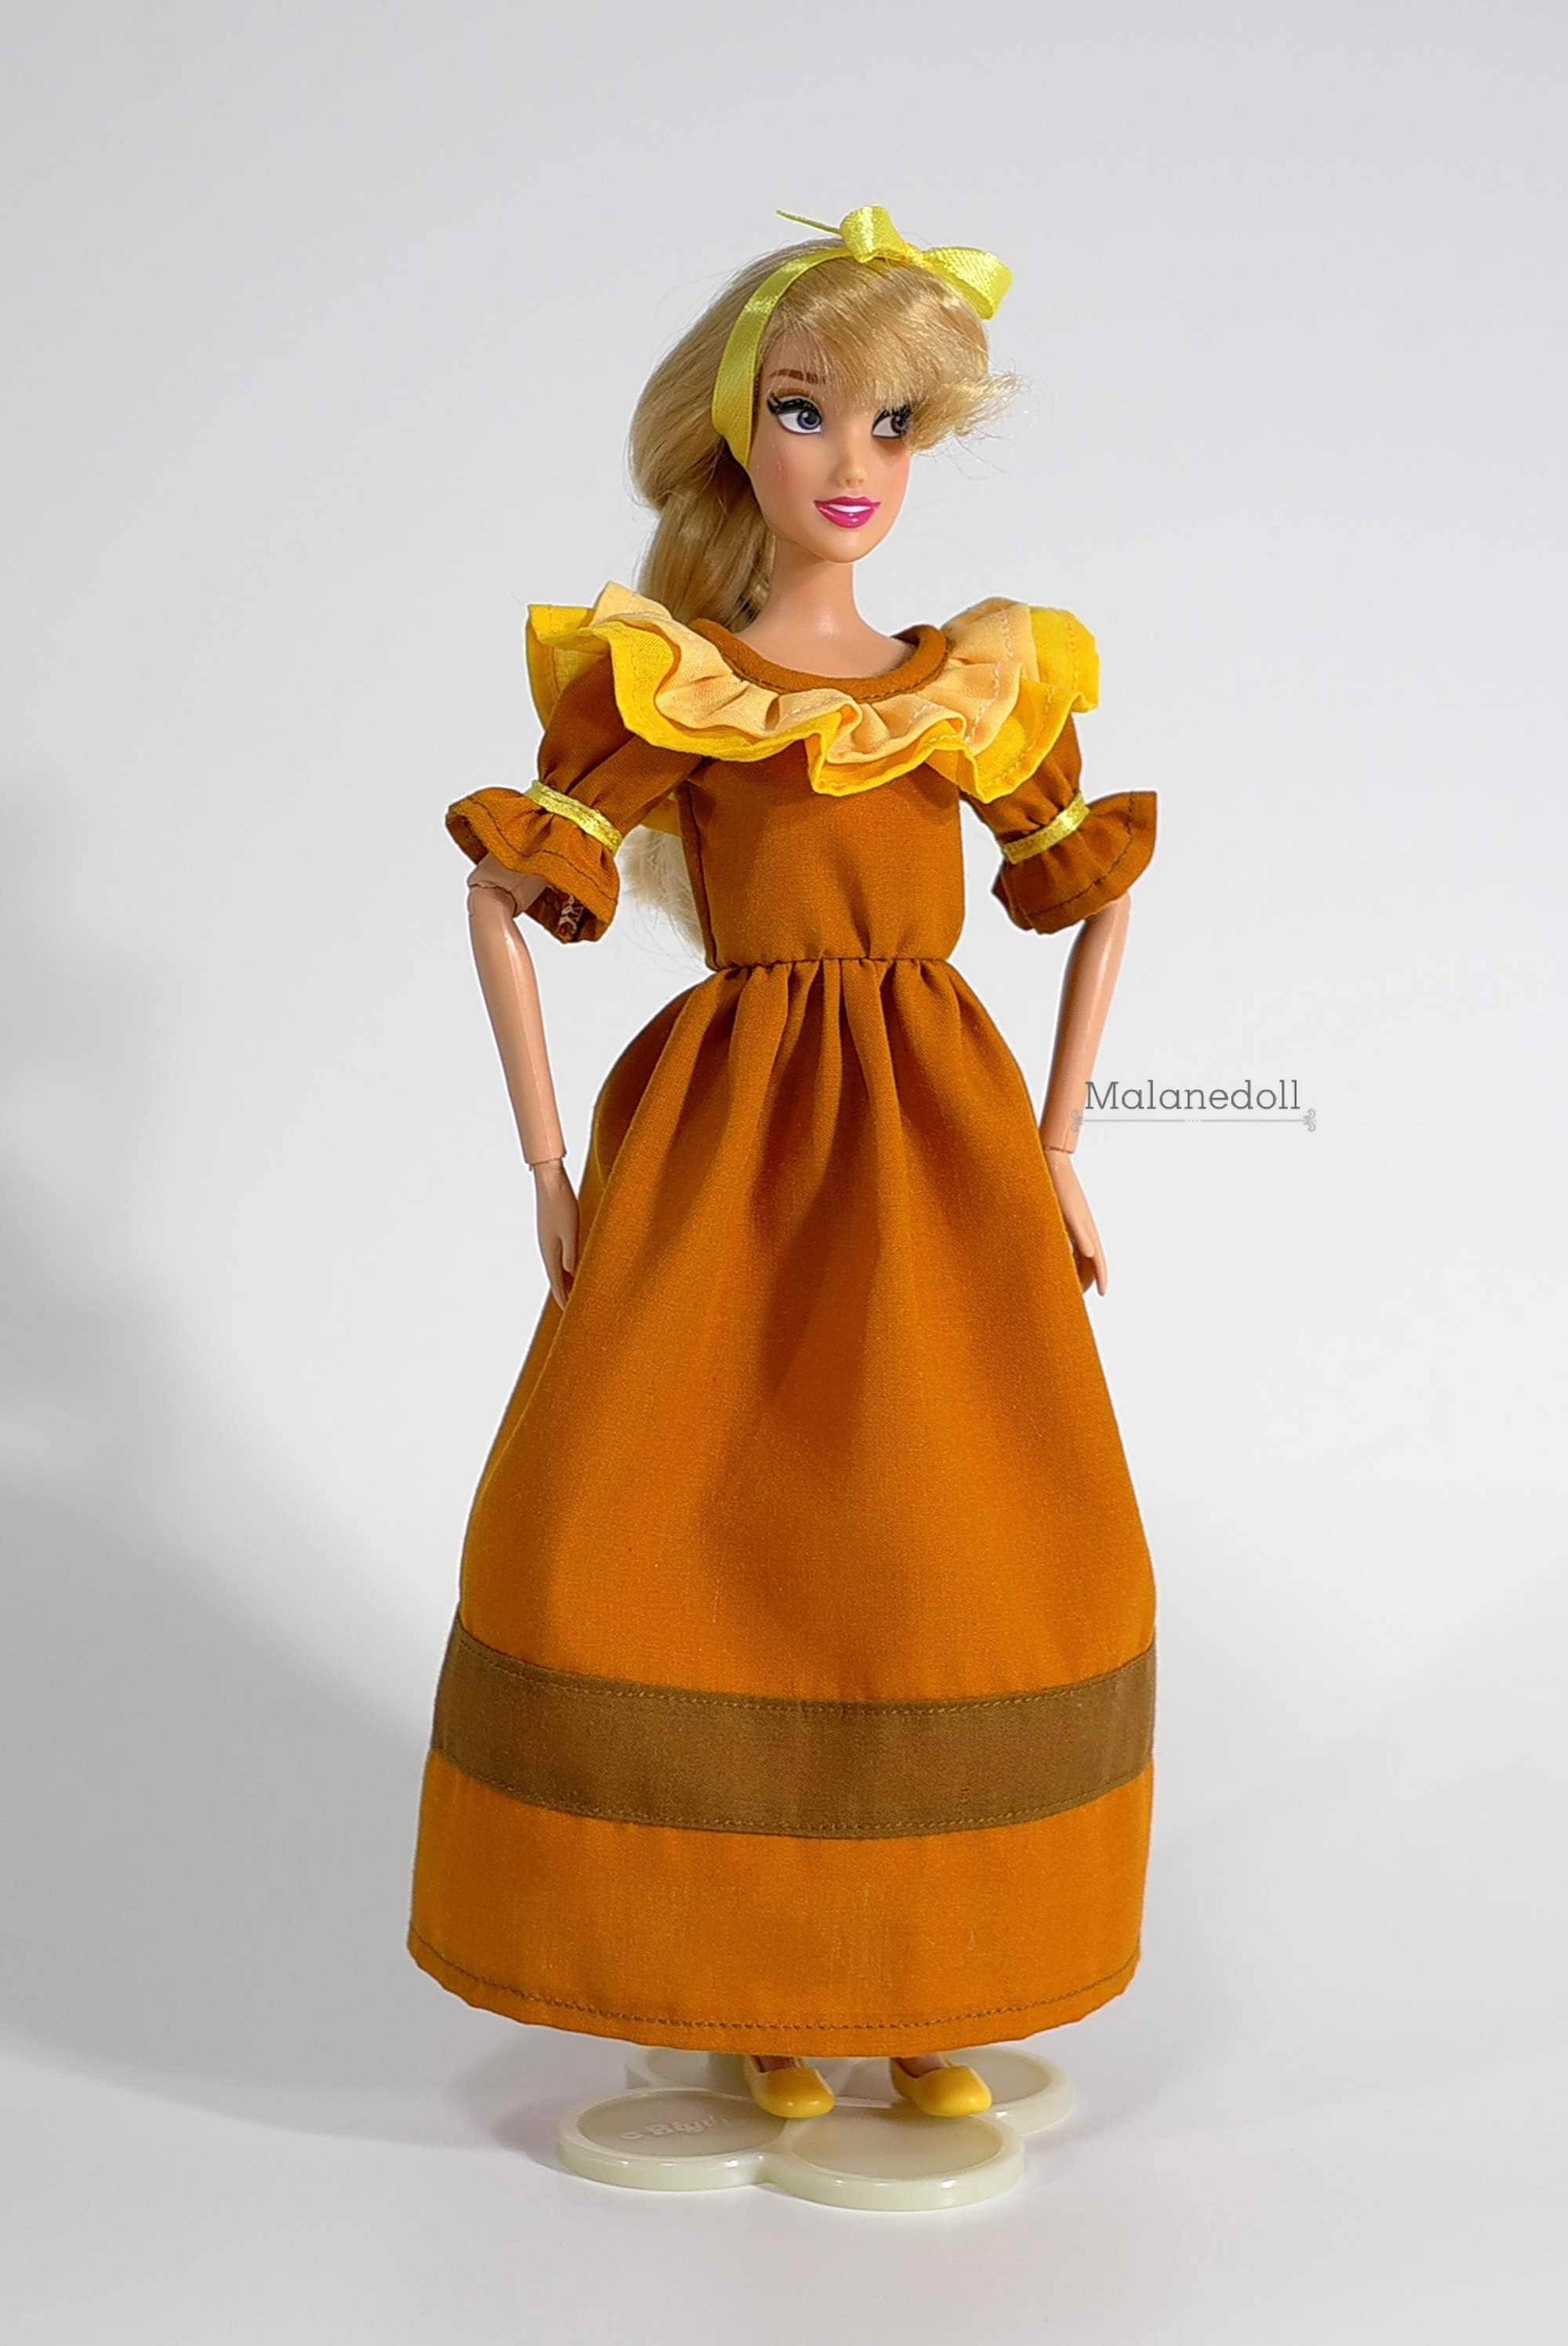 Pepa Inspired Outfit Fits 11.5 Inches or 17 Inches Dolls Like Disney  Princess Classic Dolls or Classic Singing Dolls. 